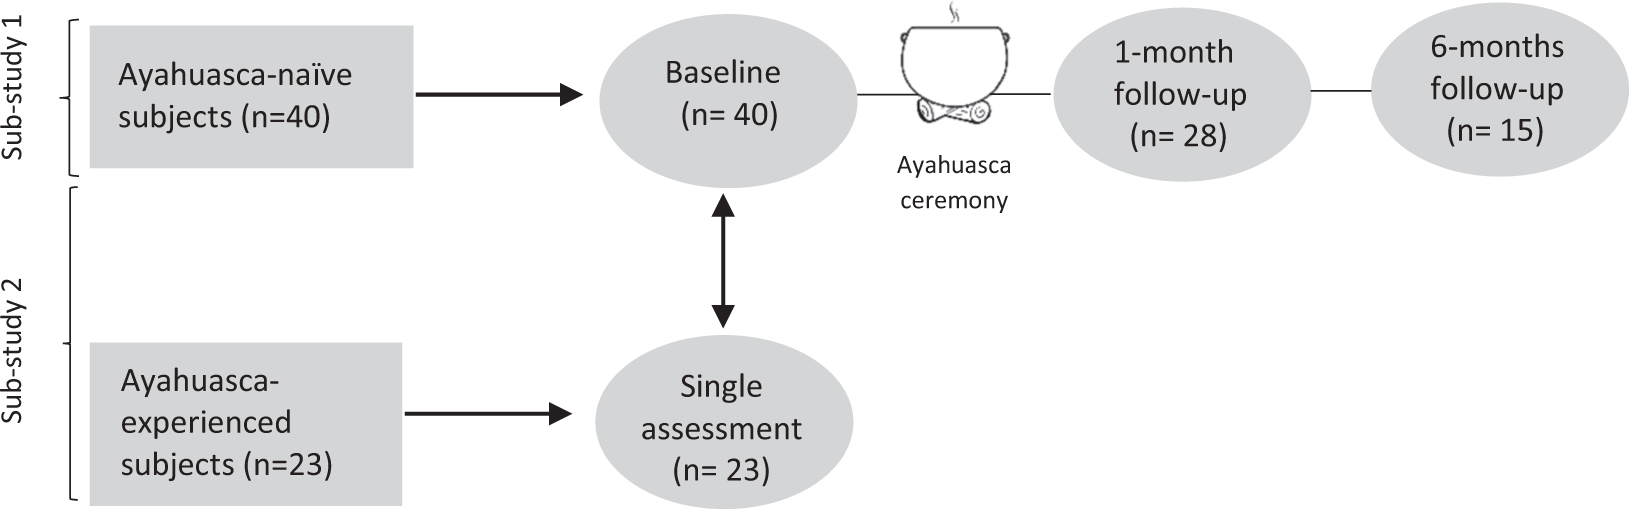 Effects of ayahuasca on mental health and quality of life in naïve users: A  longitudinal and cross-sectional study combination | Scientific Reports